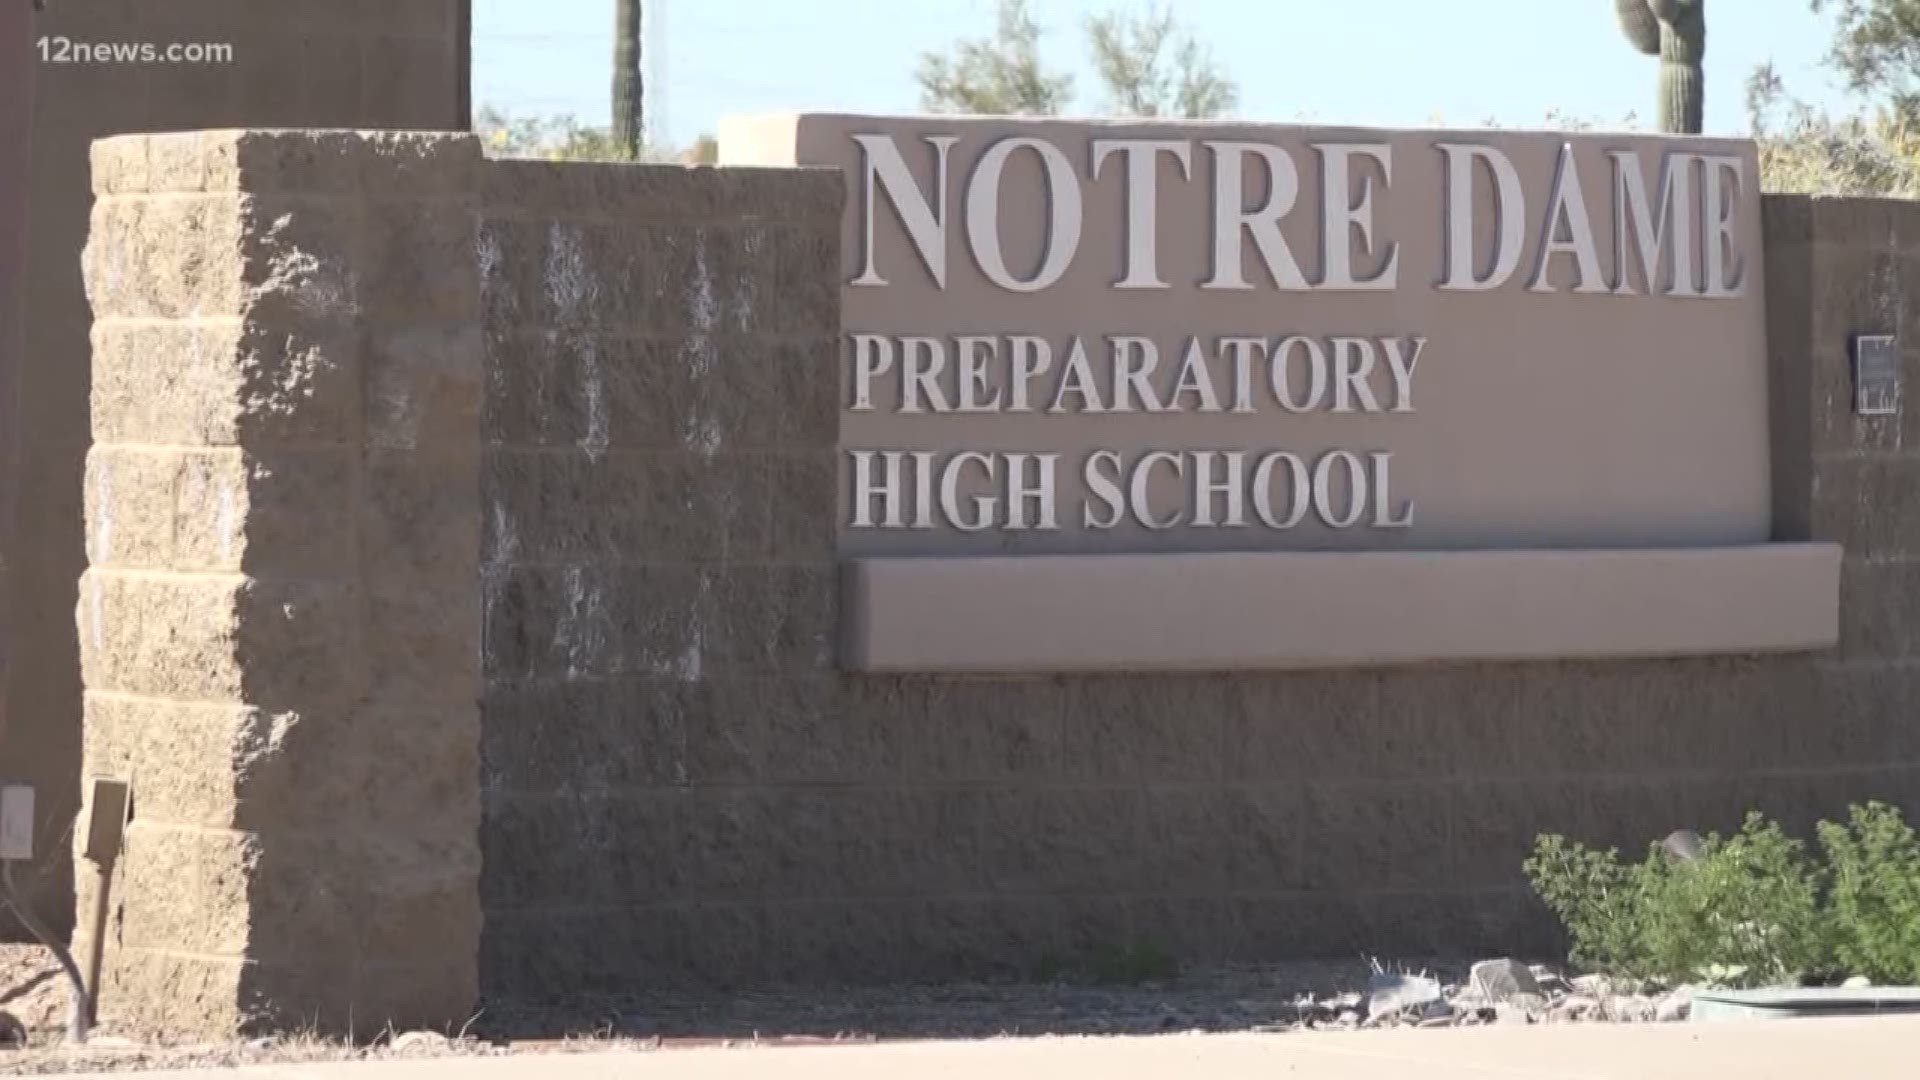 A Scottsdale teen almost died when the boy took a pill laced with fentanyl. First responders gave the teen multiple doses of Narcan and took him to a local hospital where he made a full recovery. Parents are now warning their kids not to accept pills from others.